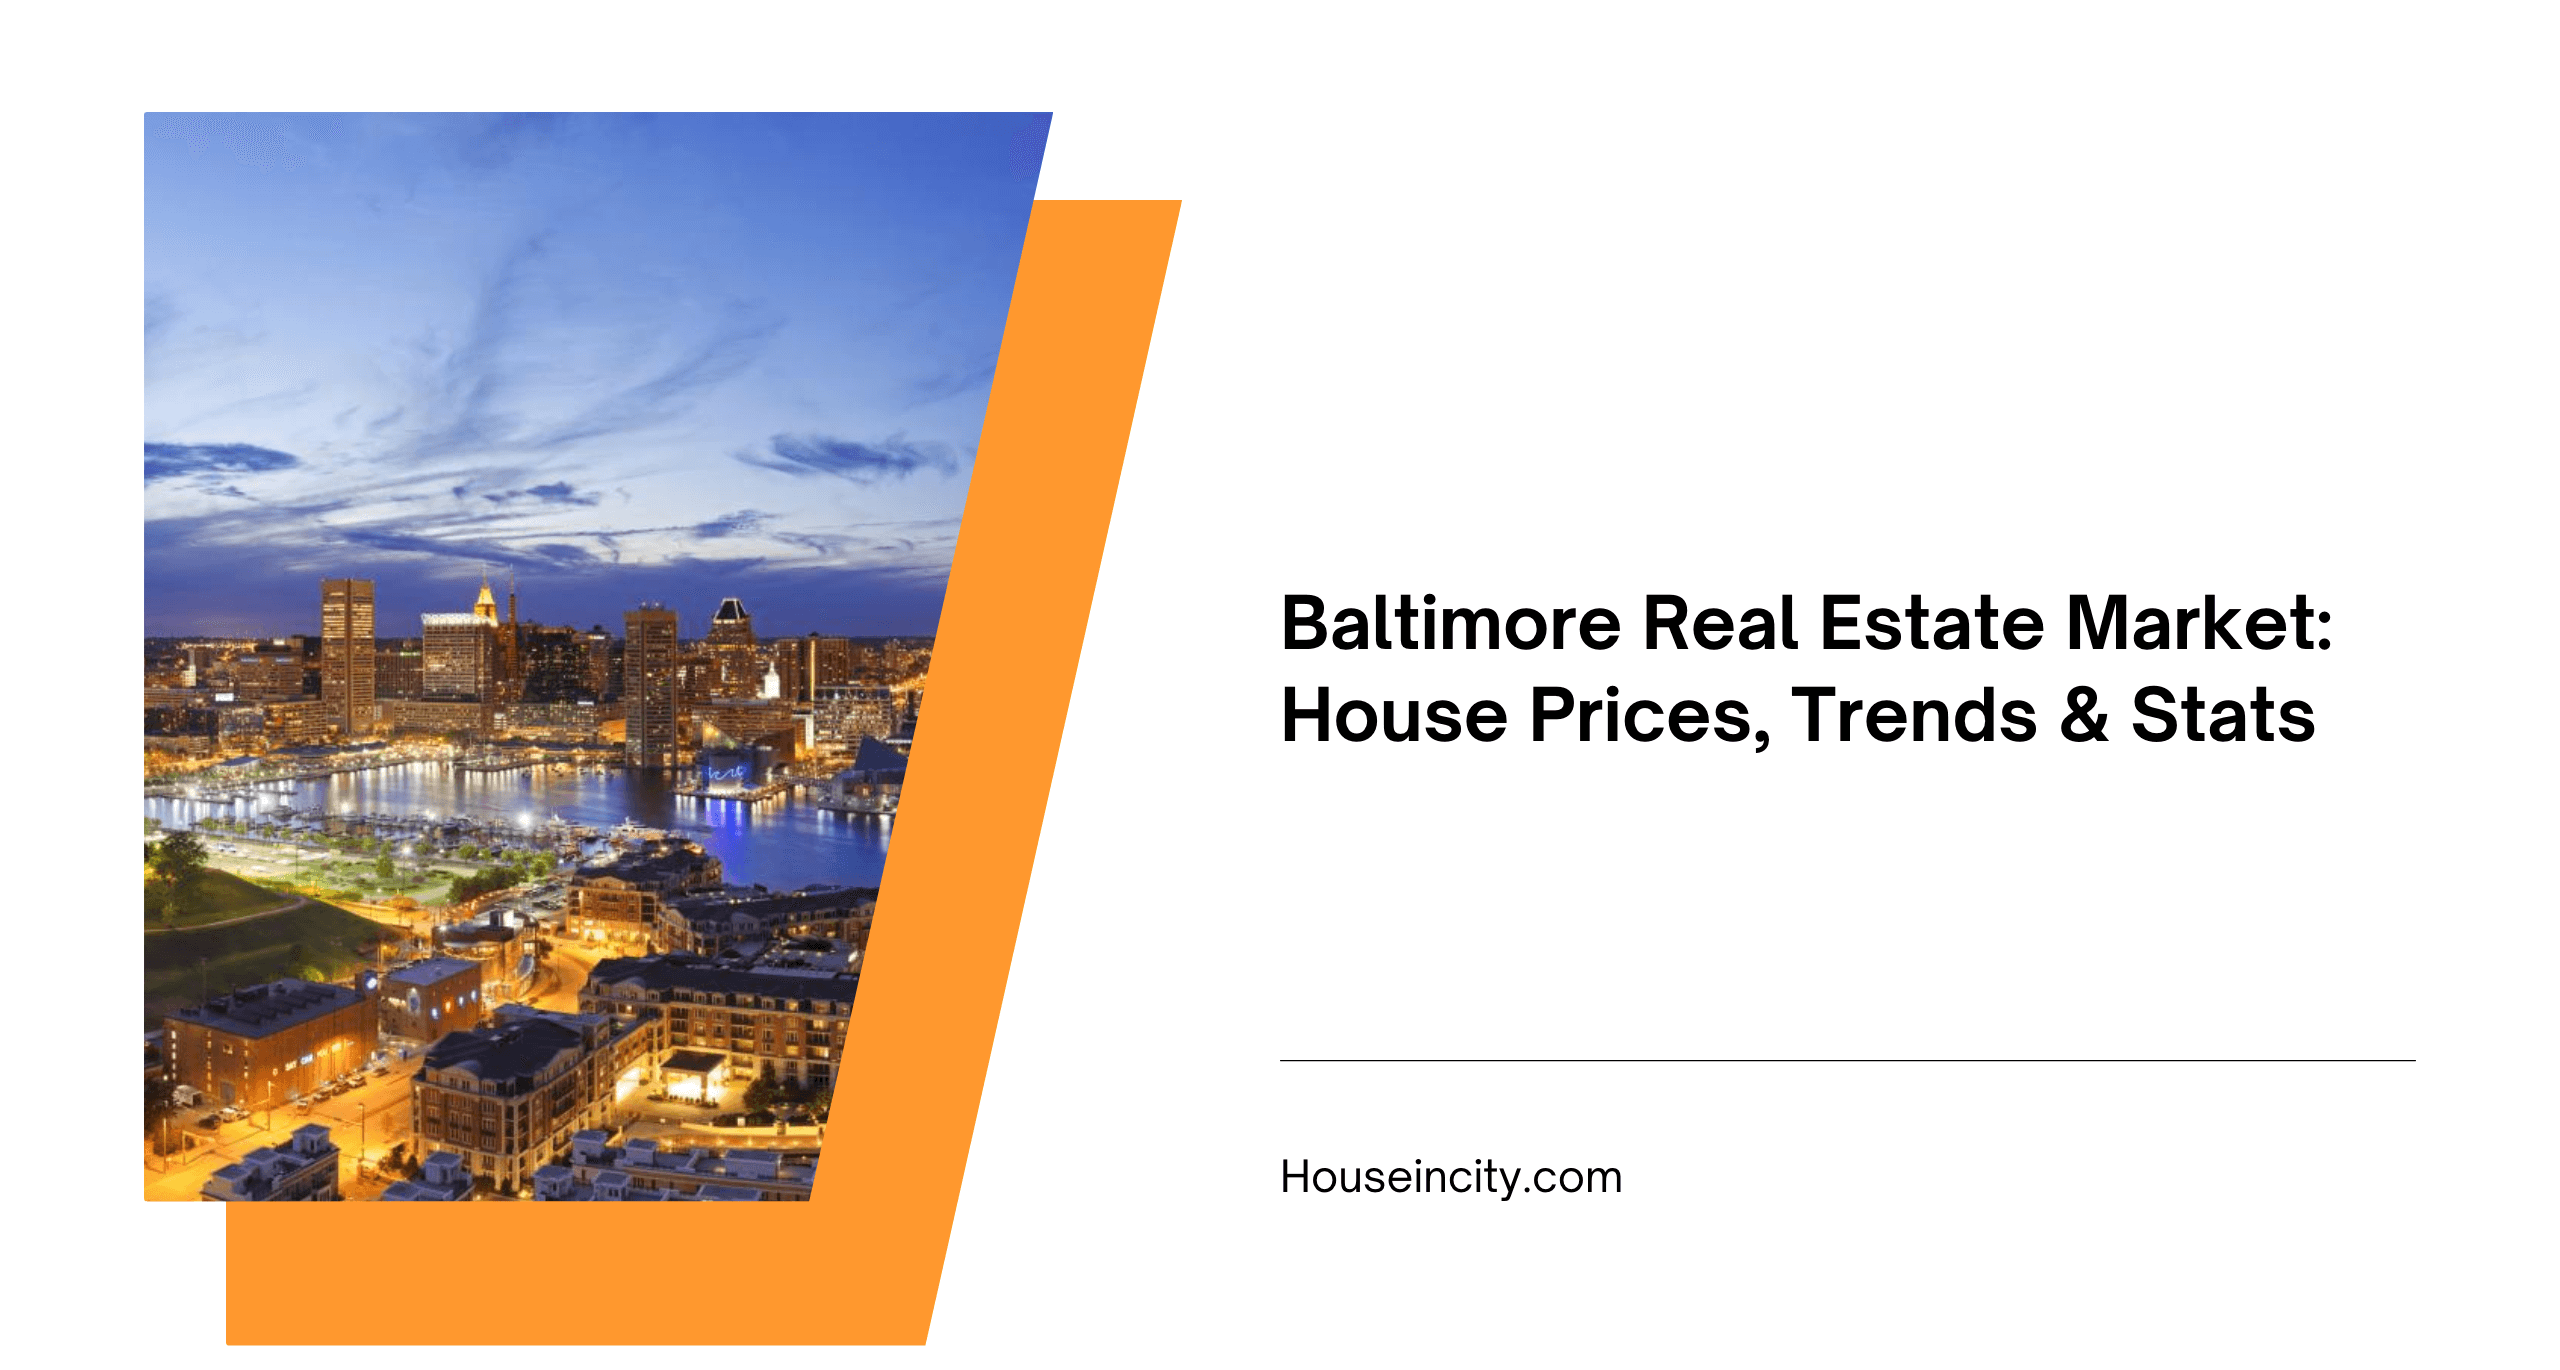 Baltimore Real Estate Market: House Prices, Trends & Stats